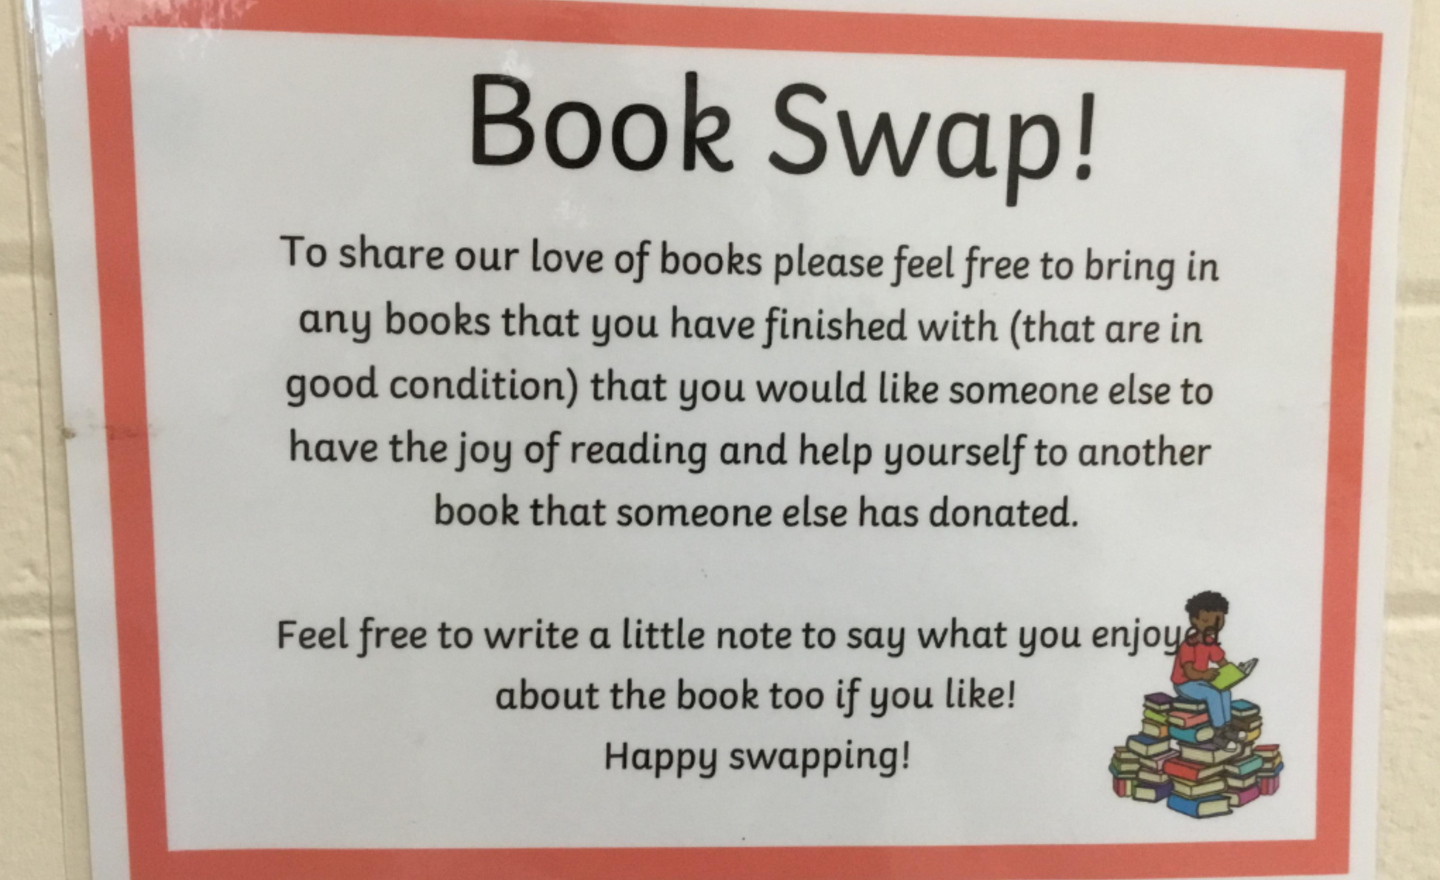 Image of Book Swap- sharing our love of reading